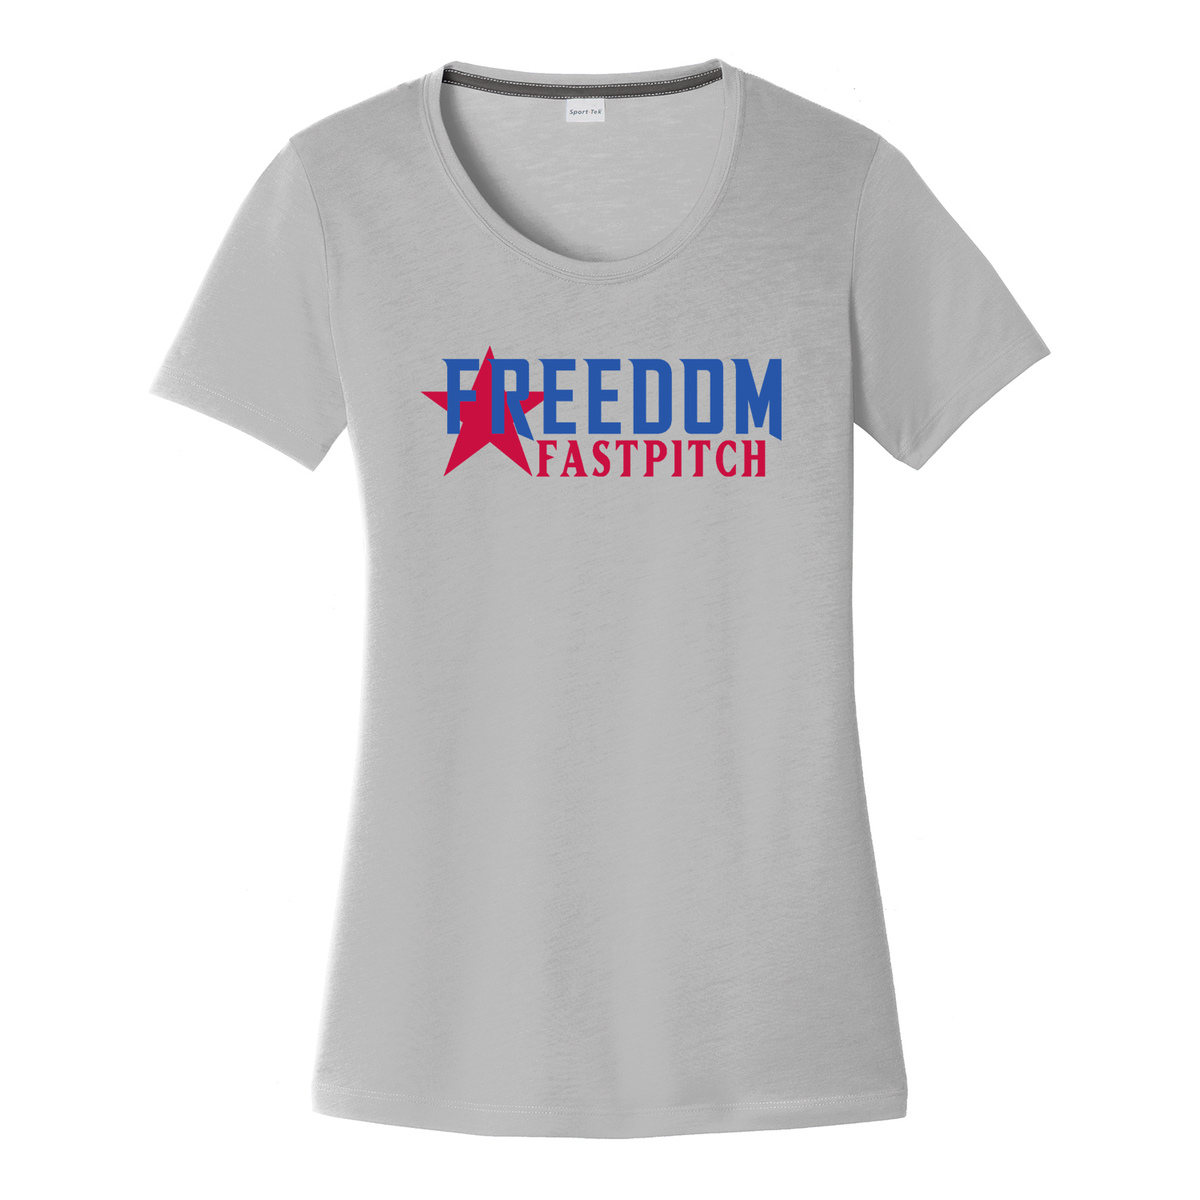 Freedom Fastpitch Women's CottonTouch Performance T-Shirt